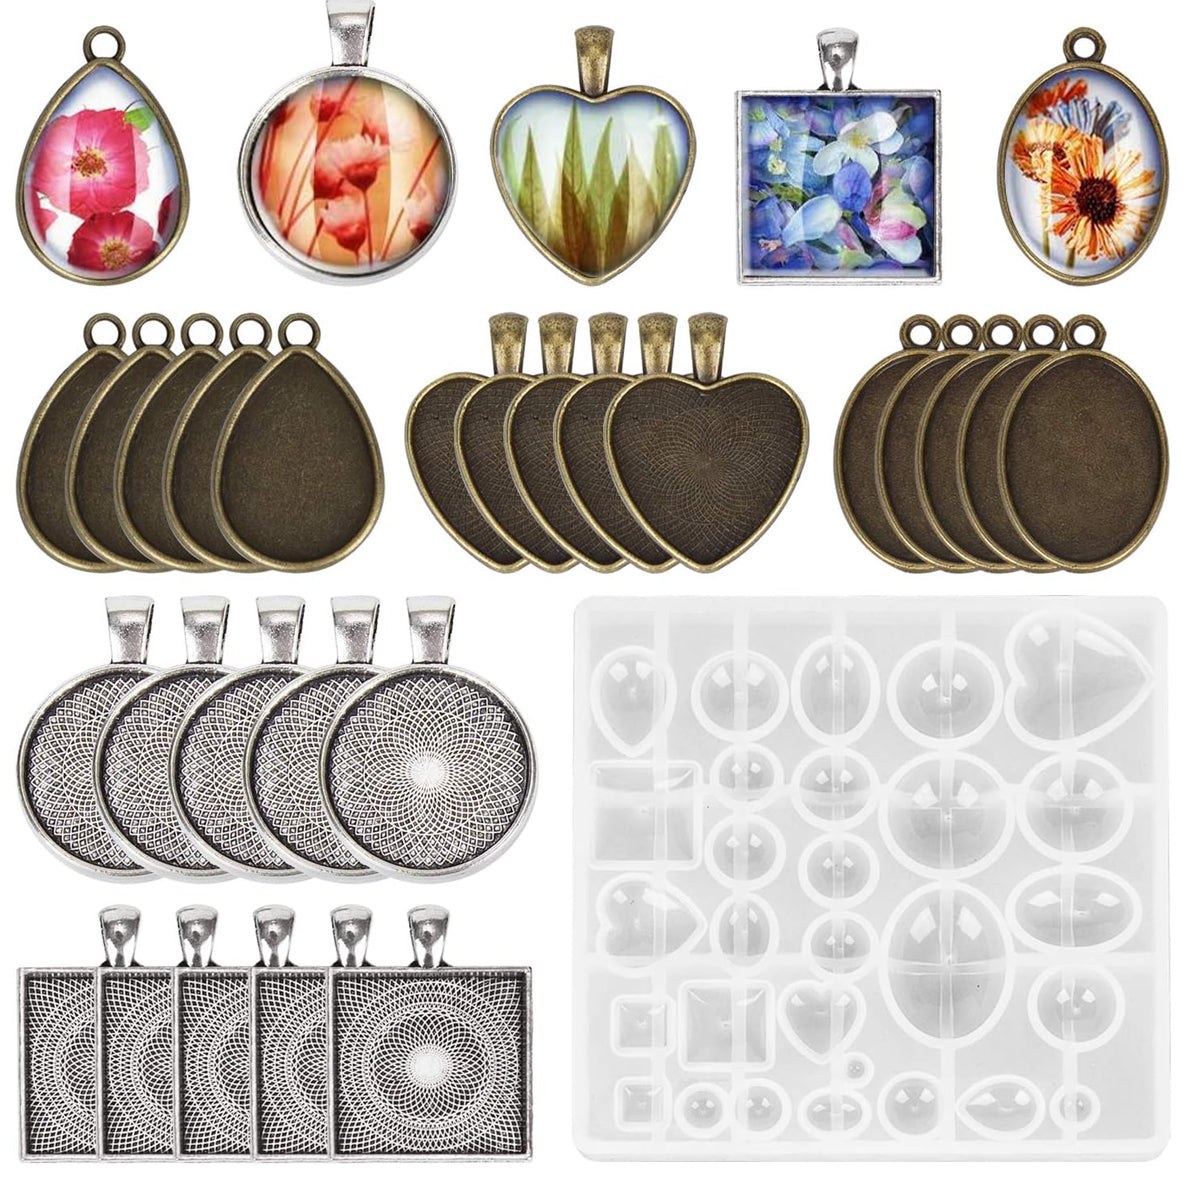 HASTHIP® Resin Molds Set Pendant Trays DIY Jewelry Making Resin Molds Set, 30Pcs 5 Styles Metal Pendant and 1 Pc Silicone Epoxy Jewelry Casting Molds for Pendant Crafting DIY Jewelry Gift Making